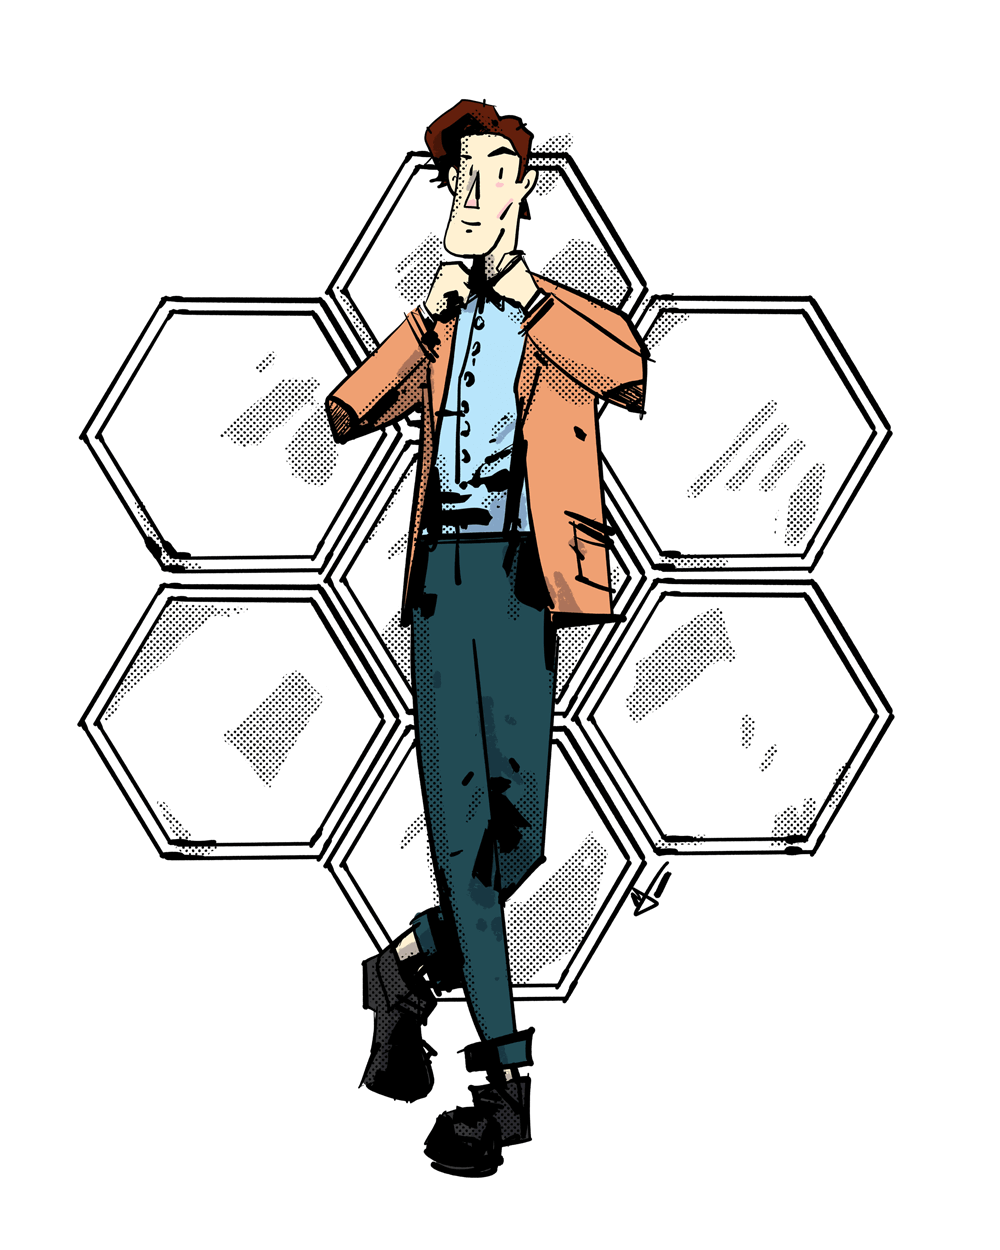 The Eleventh Doctor, played by Matt Smith, has a jacket and suspenders and most importantly a bowtie. He's standing a bit jauntingly with his feet crossed.